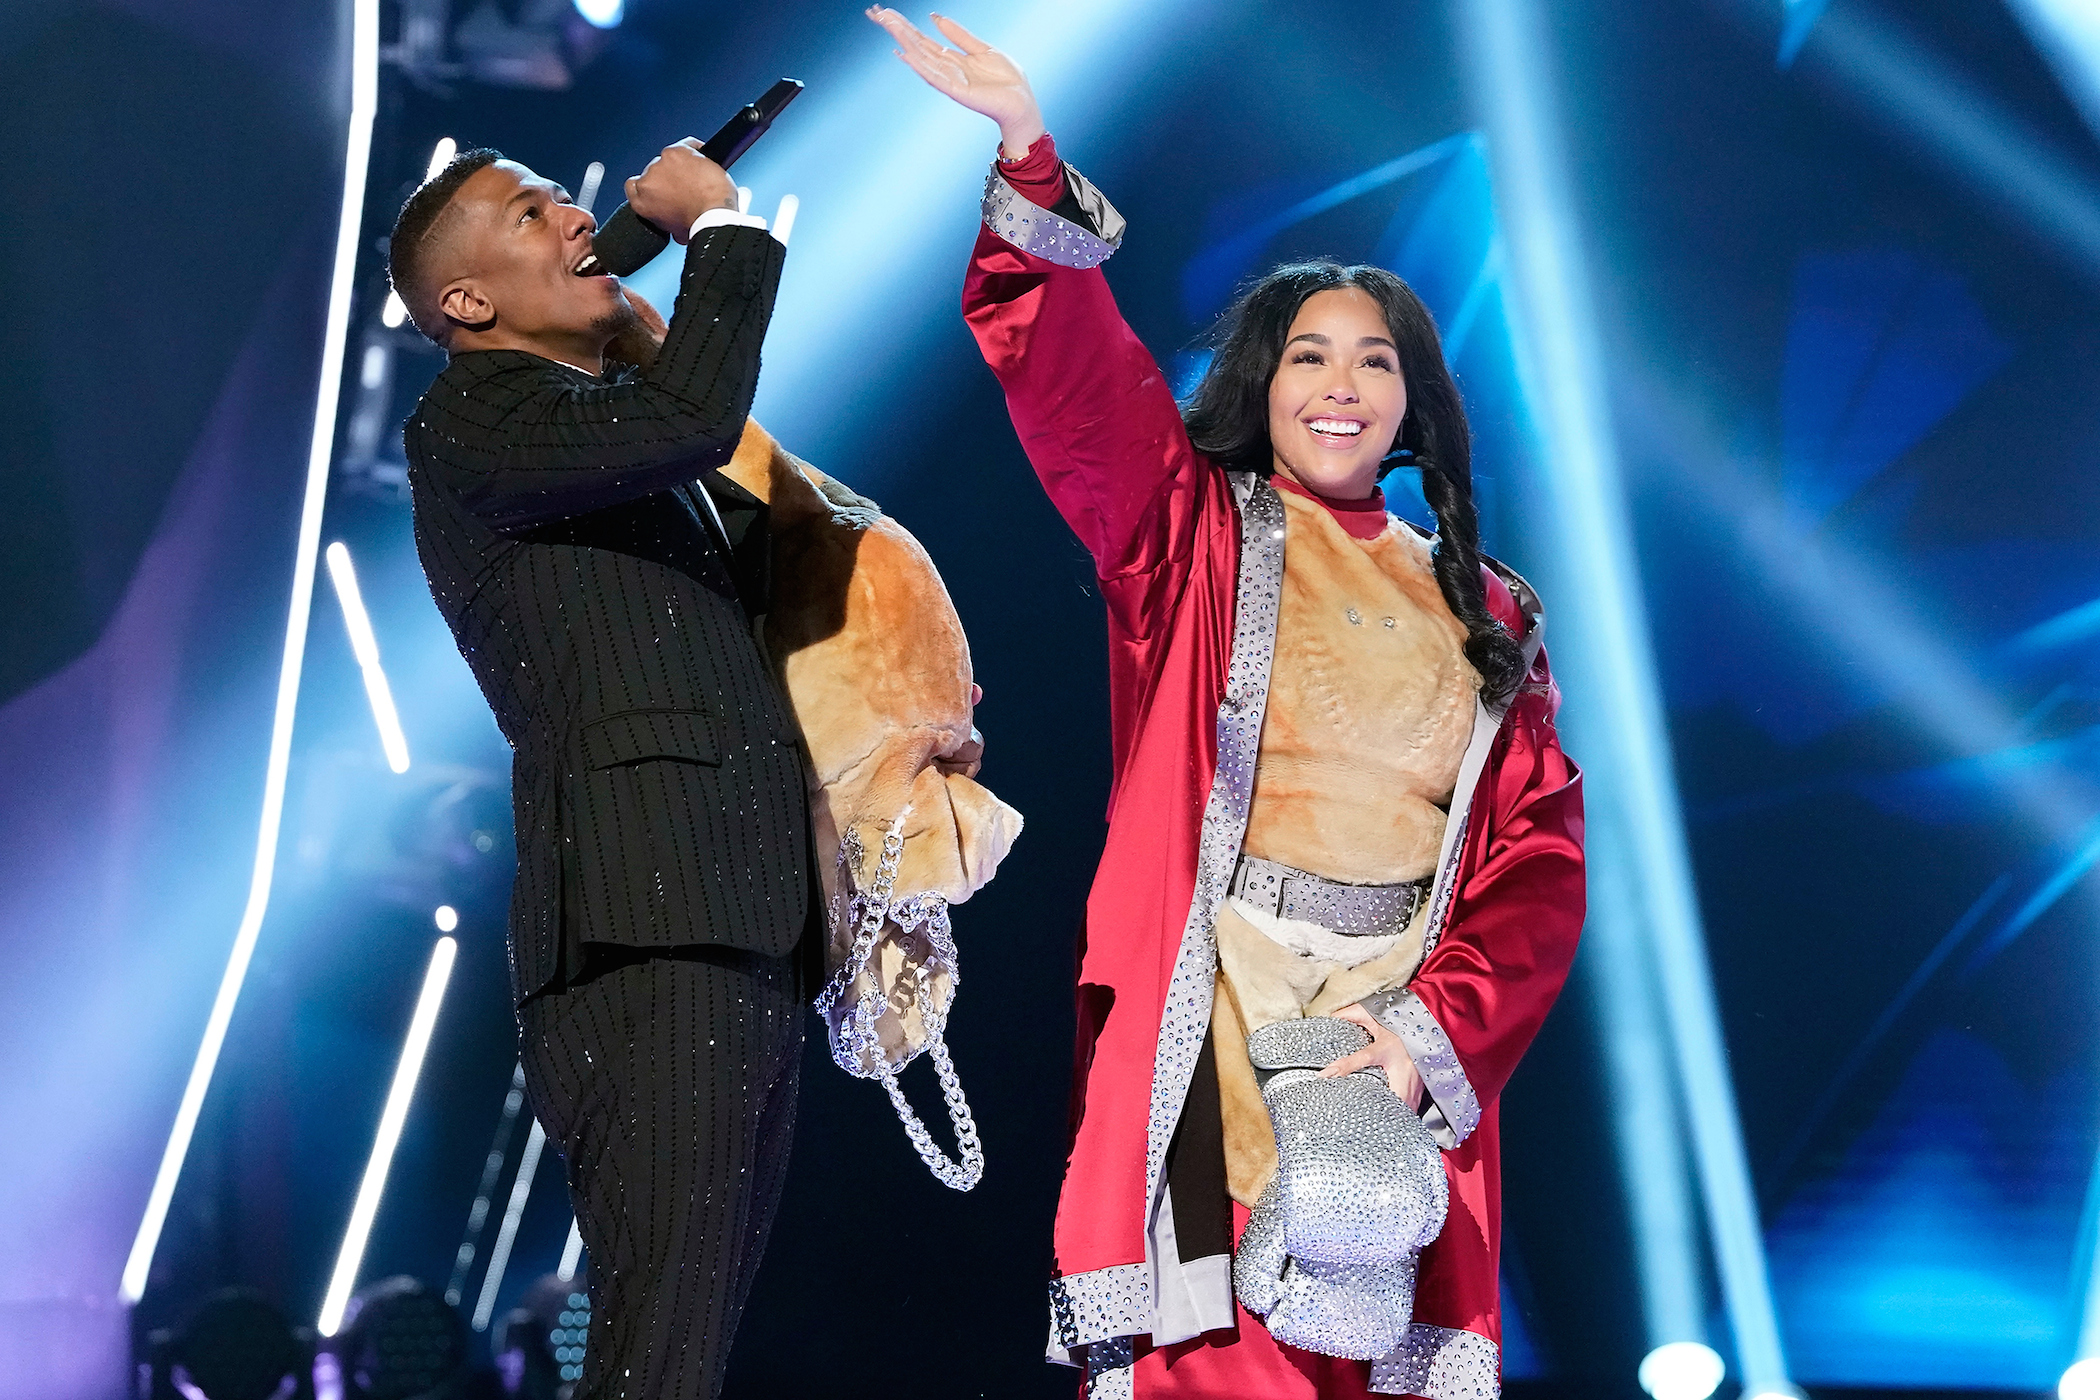 Nick Cannon next to 'Masked Singer' star Jordyn Woods waving to the cameras on 'The Masked Singer'